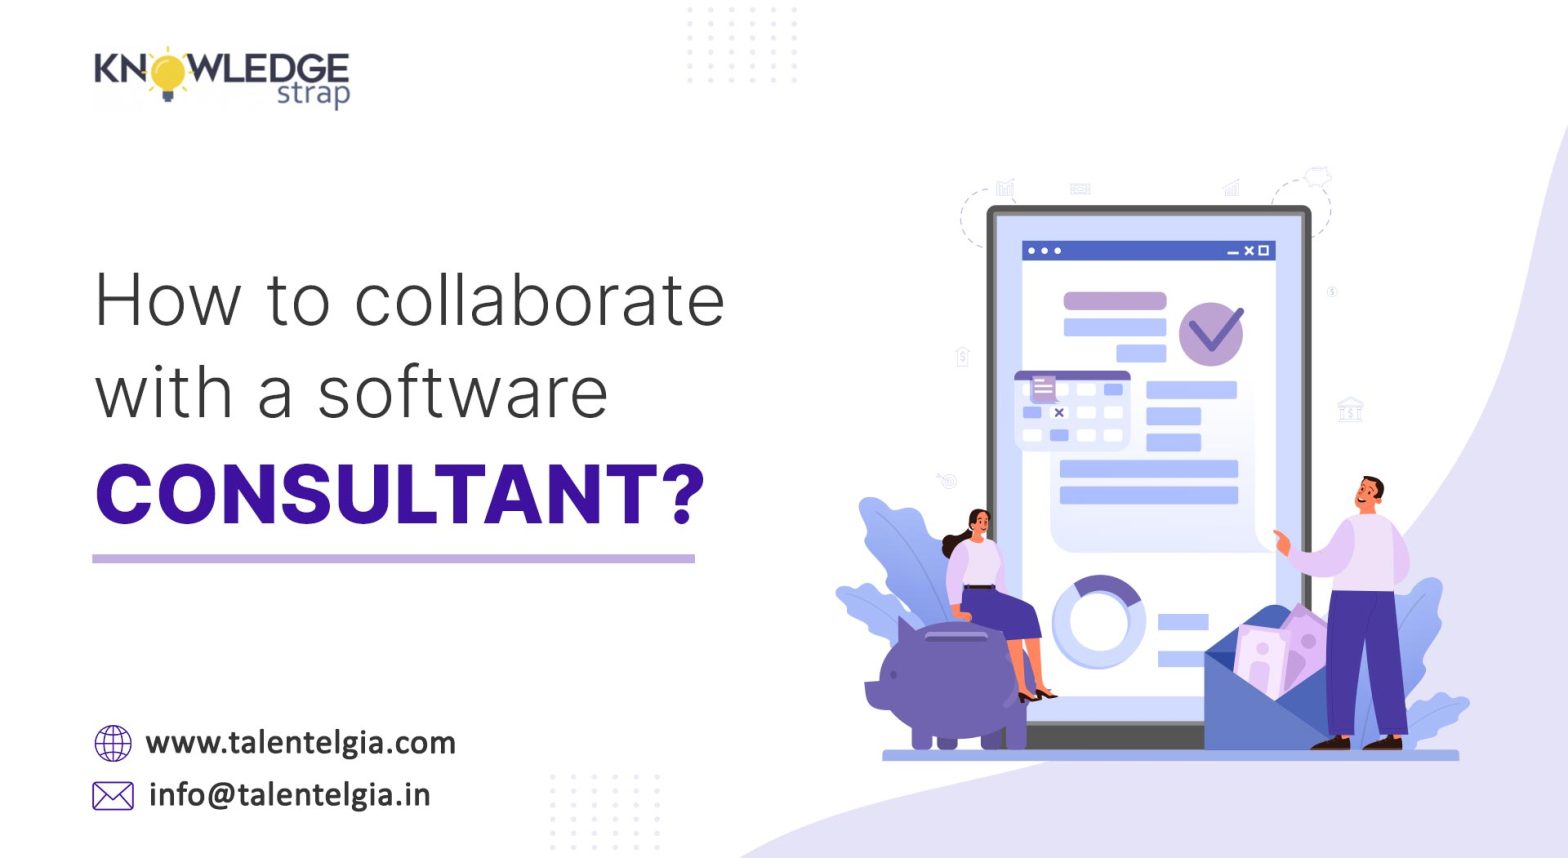 How to collaborate with a software consultant?